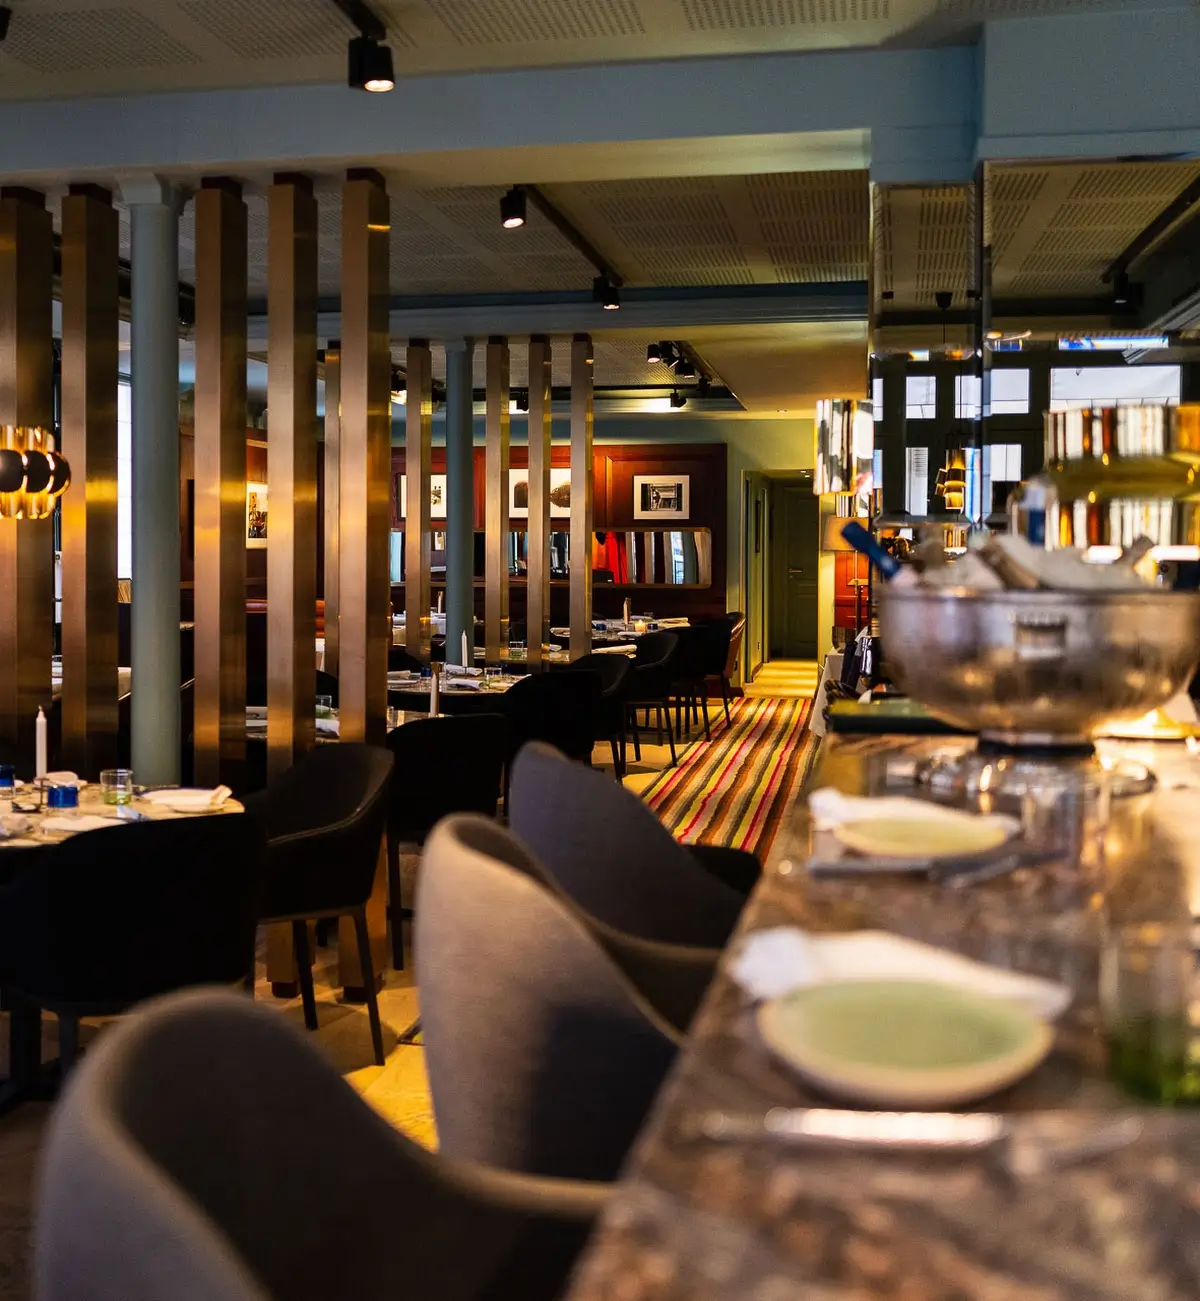 Modern interior of Restaurant Gaya in Paris, featuring stylish decor and seating.